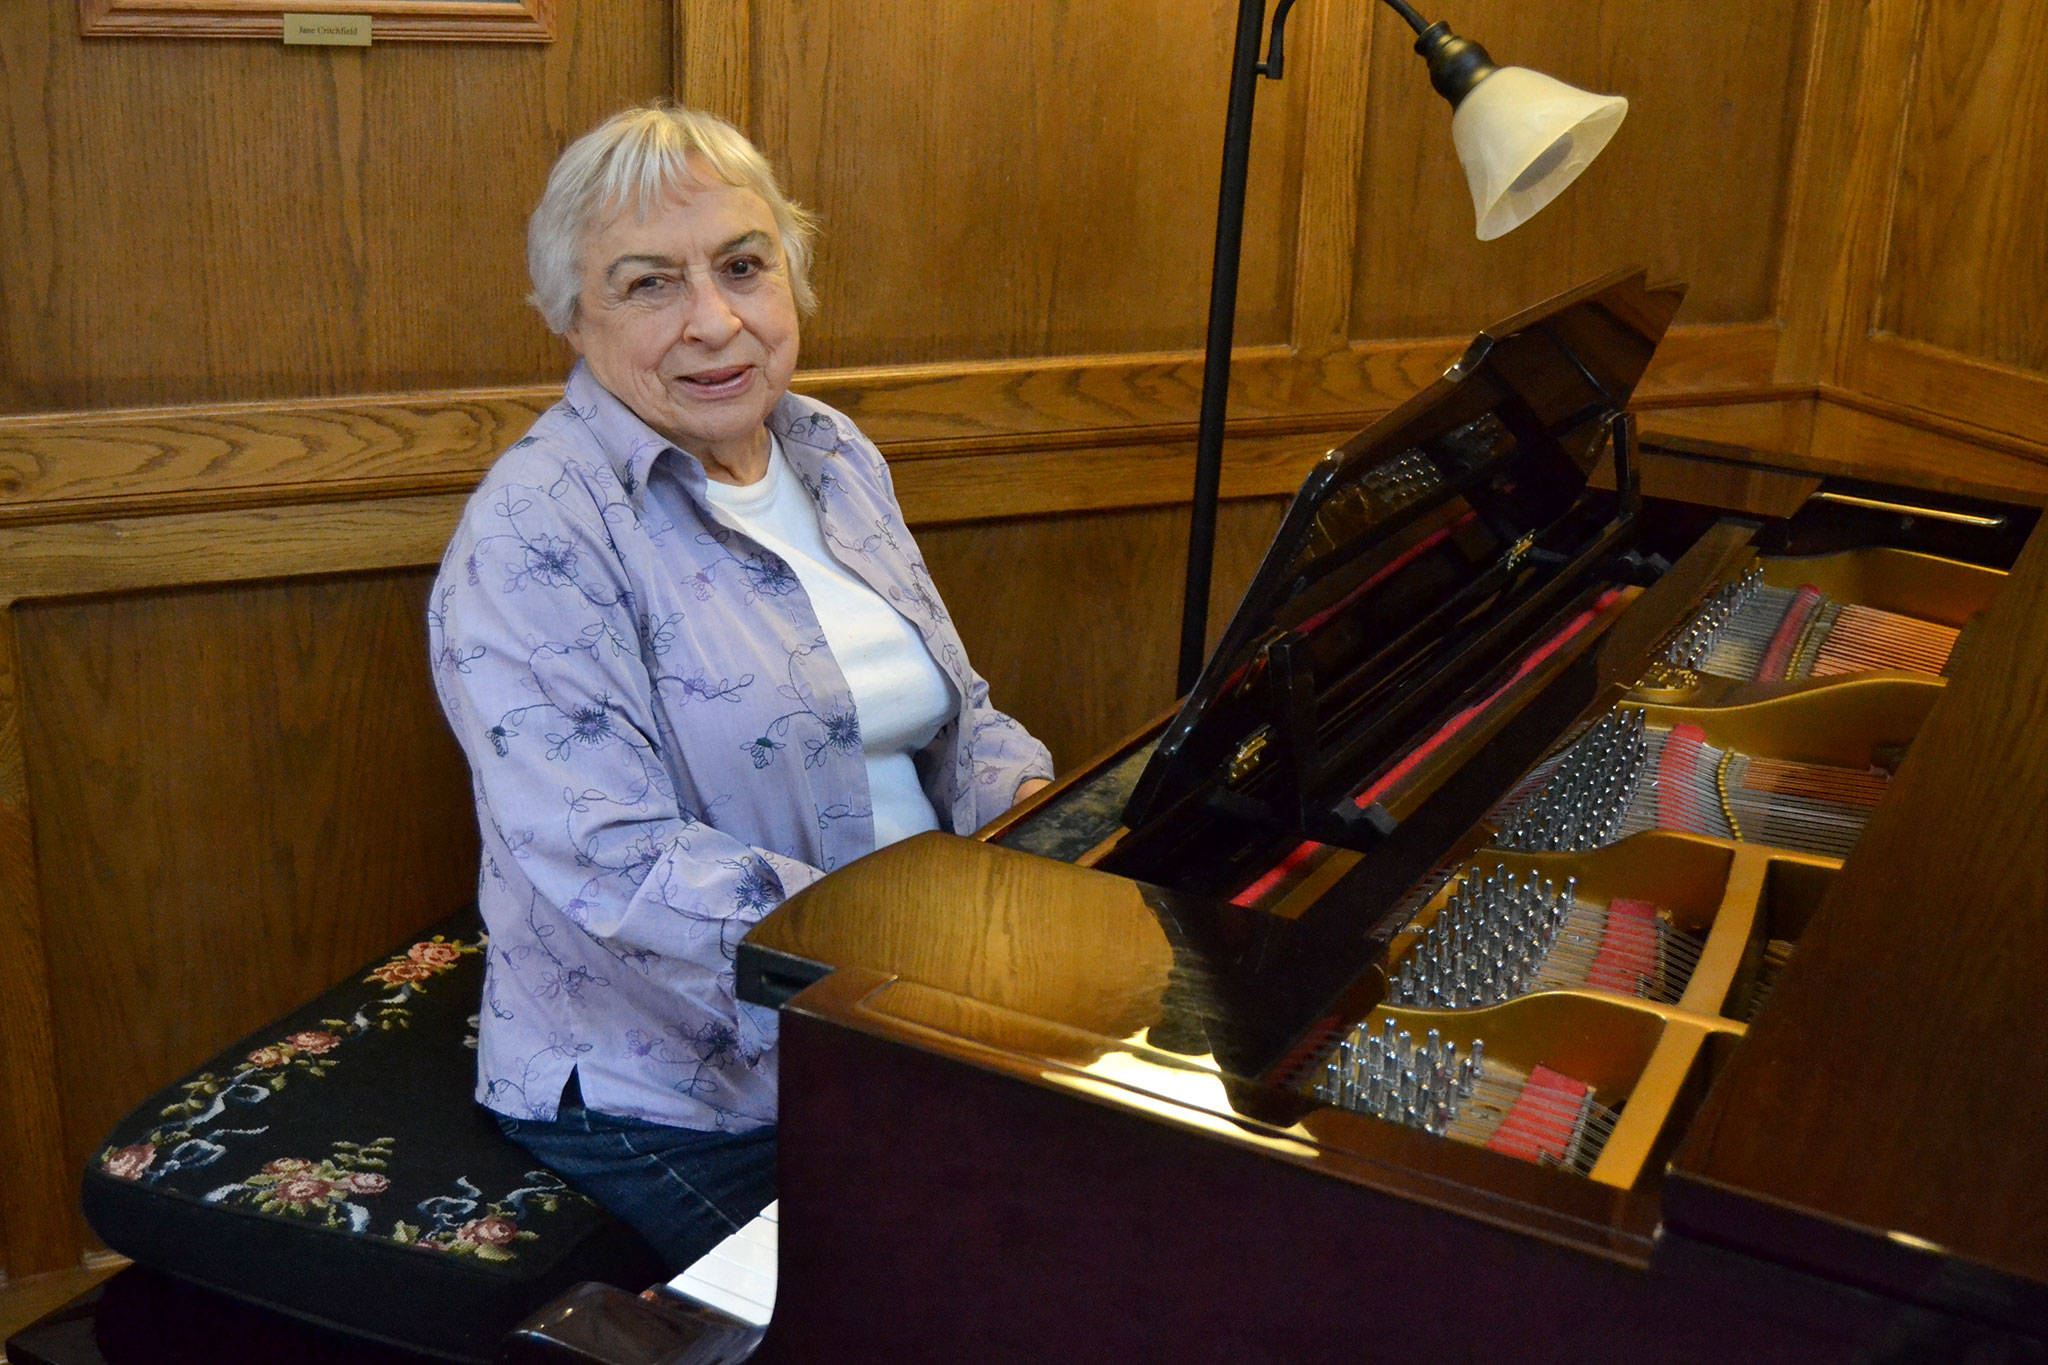 Wilma Rhodefer Johnson has been playing the piano for 30 plus years in church and continues to play weekly for Sequim seniors. This May, she’ll ride in the Sequim Irrigation Festival’s Grand Parade as a Grand Pioneer. Sequim Gazette photo by Matthew Nash